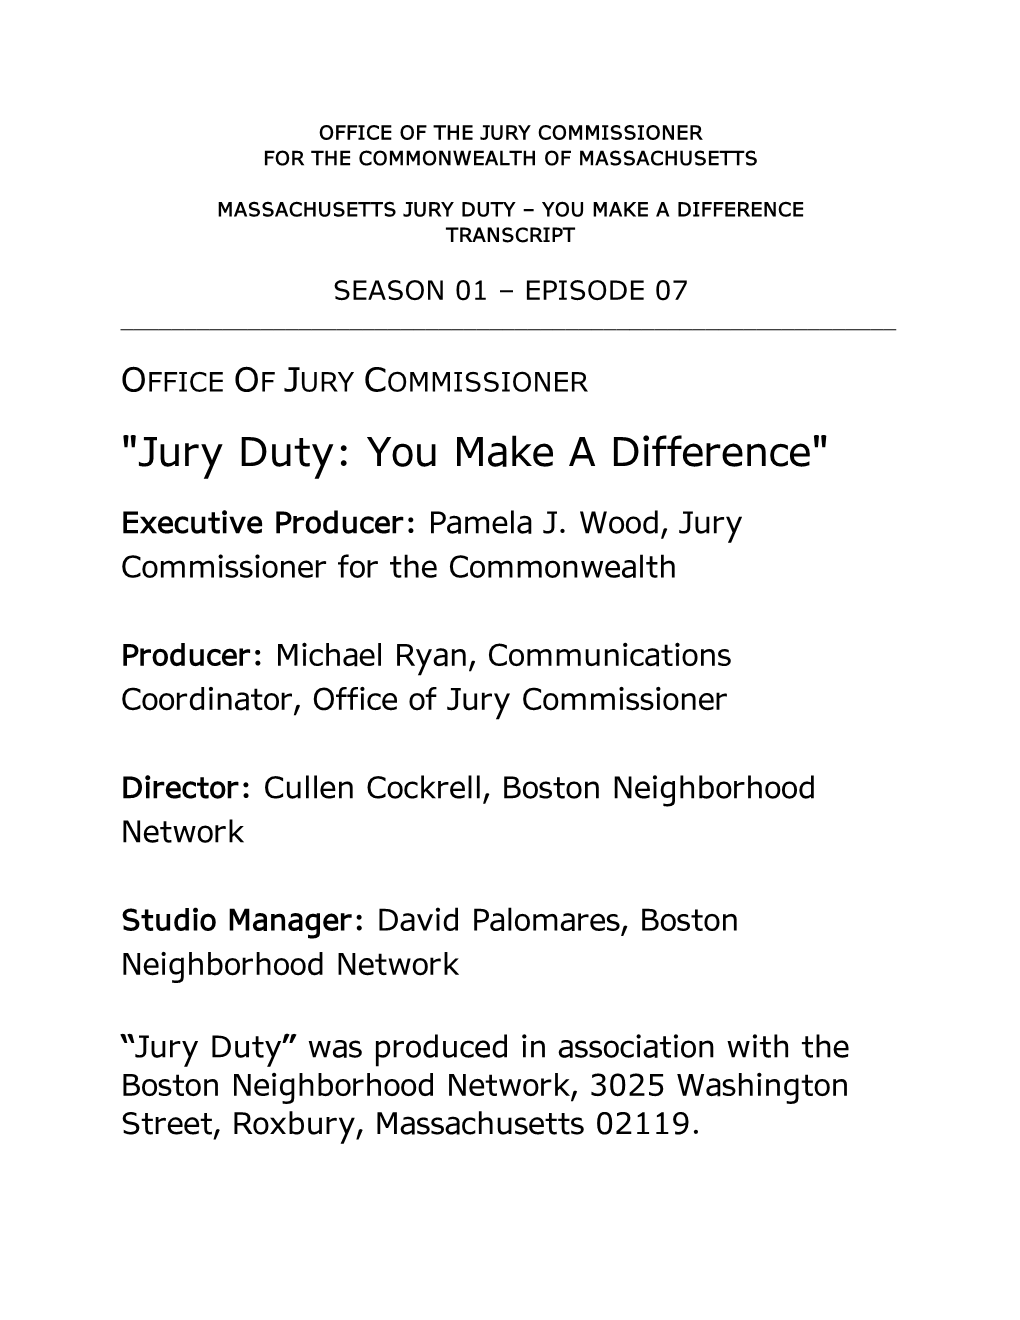 "Jury Duty: You Make a Difference"